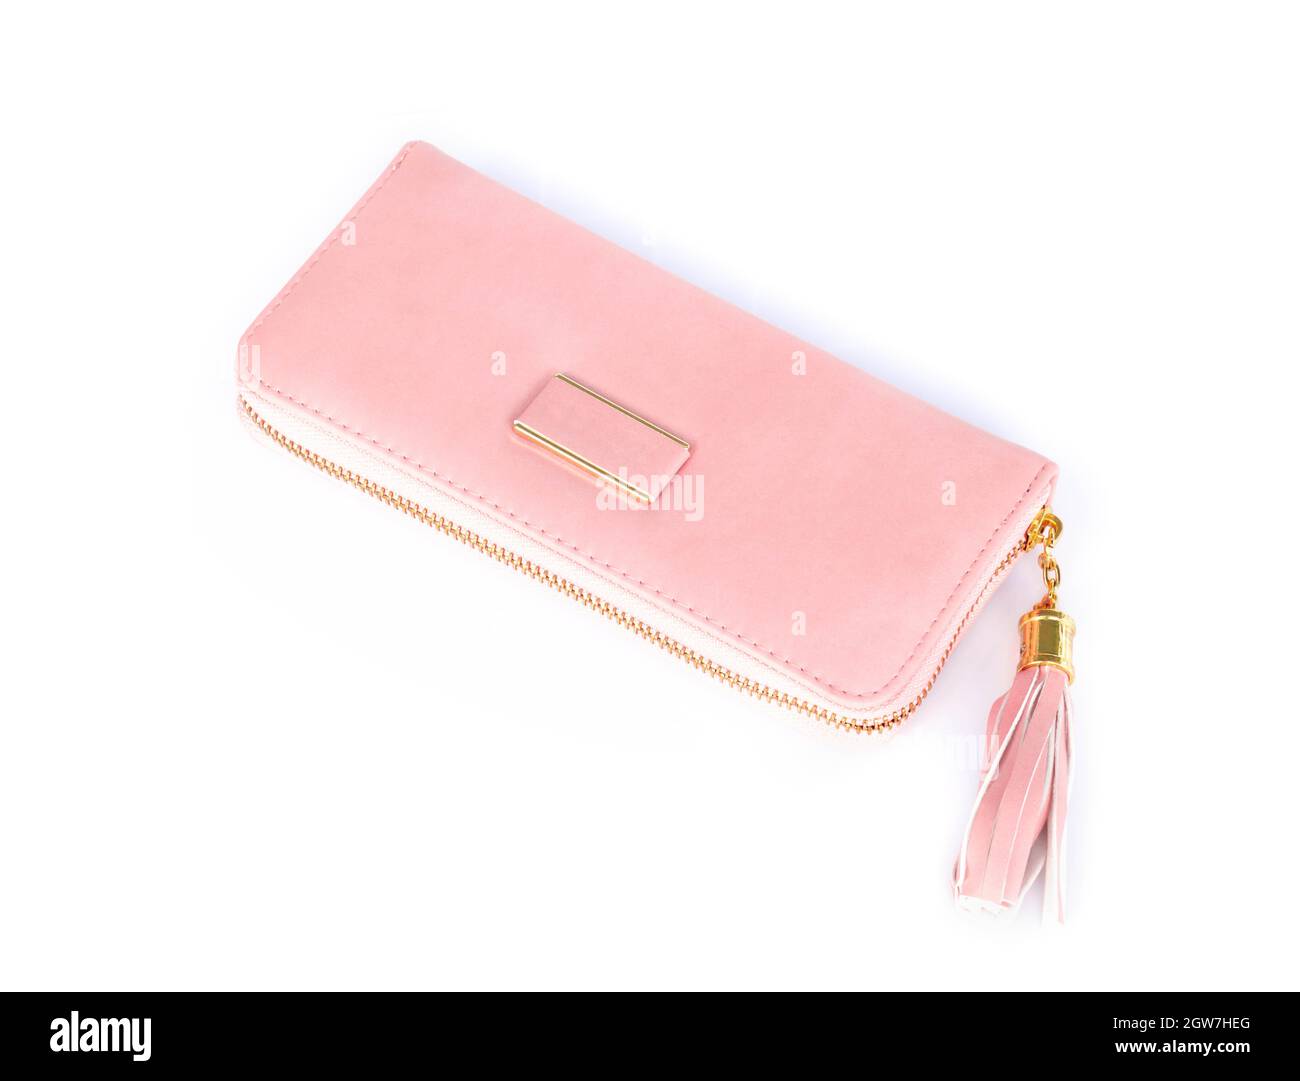 High Angle View Of Purse On White Background Stock Photo